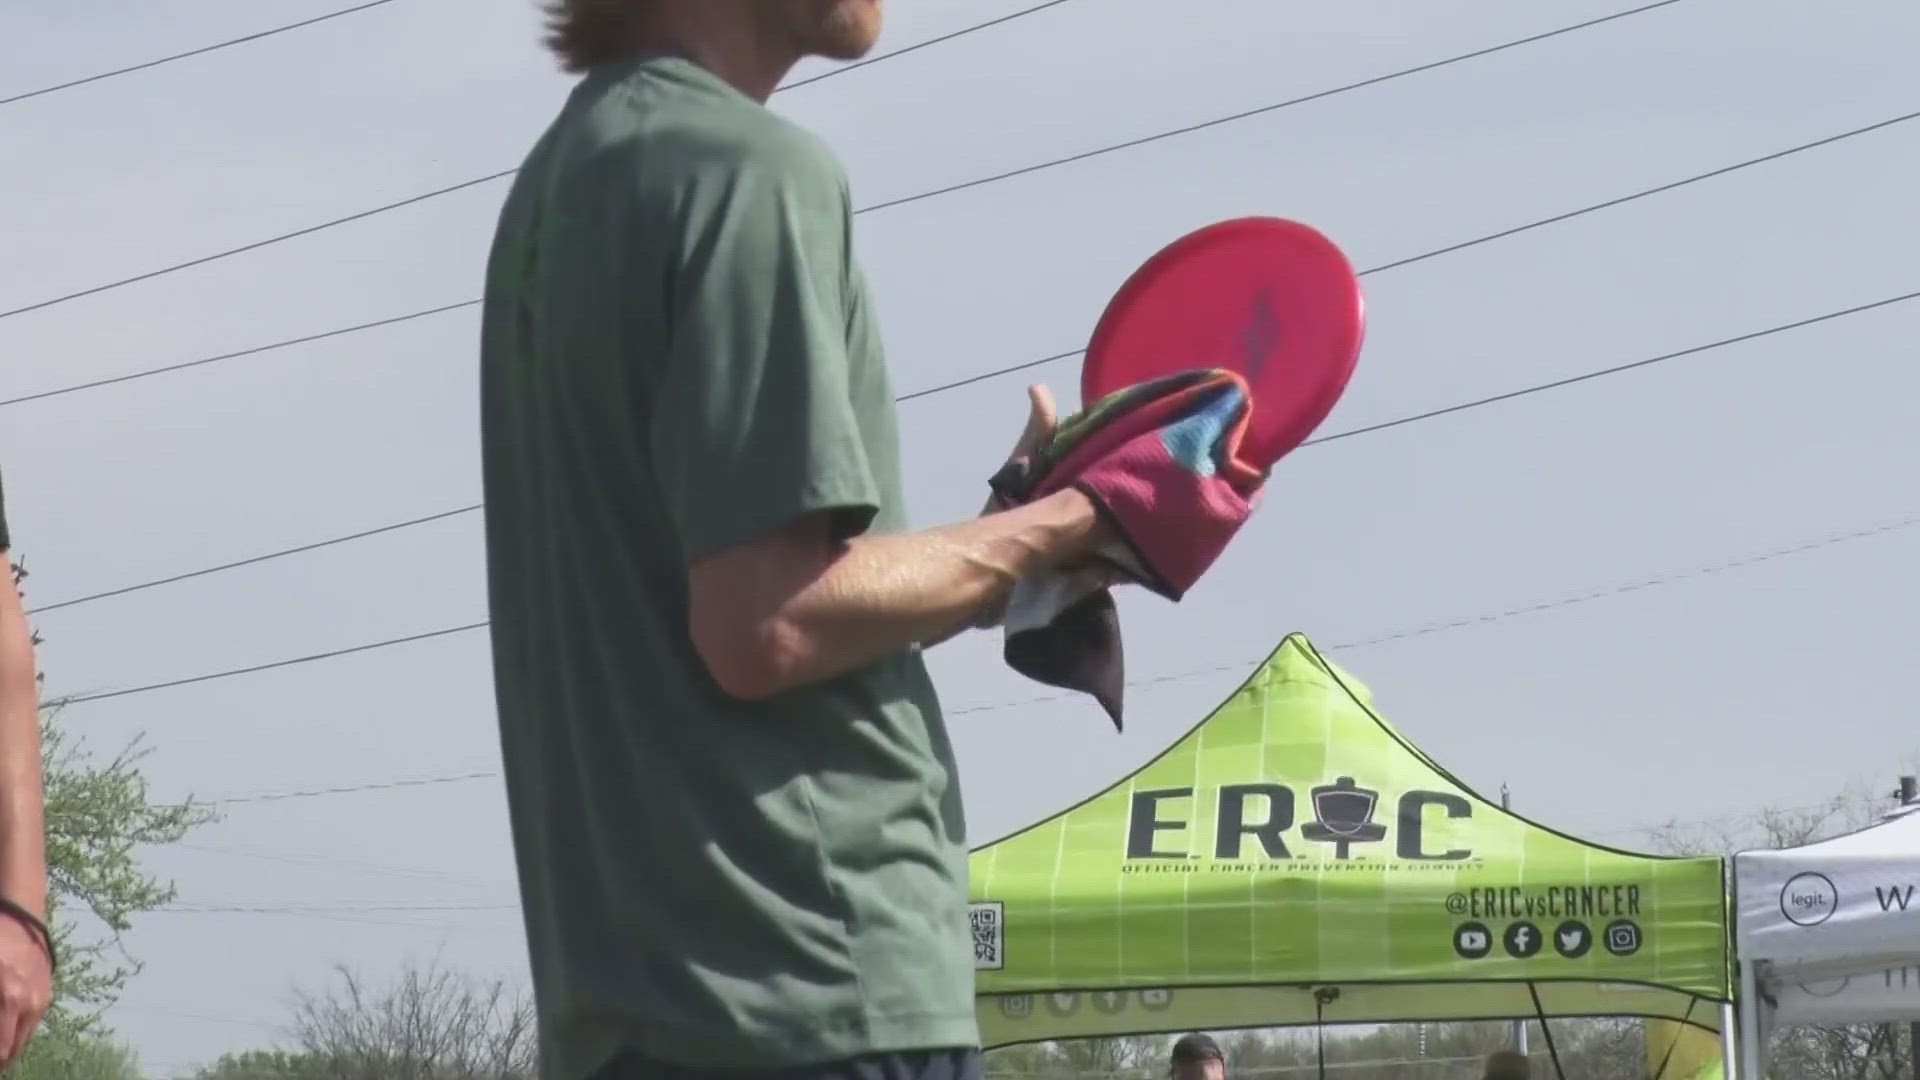 The 27th Waco Annual Charity Open is the second stop on the 2023 Disc Golf Pro Tour. Athletes from around the country have come to Waco to compete for the top spot.